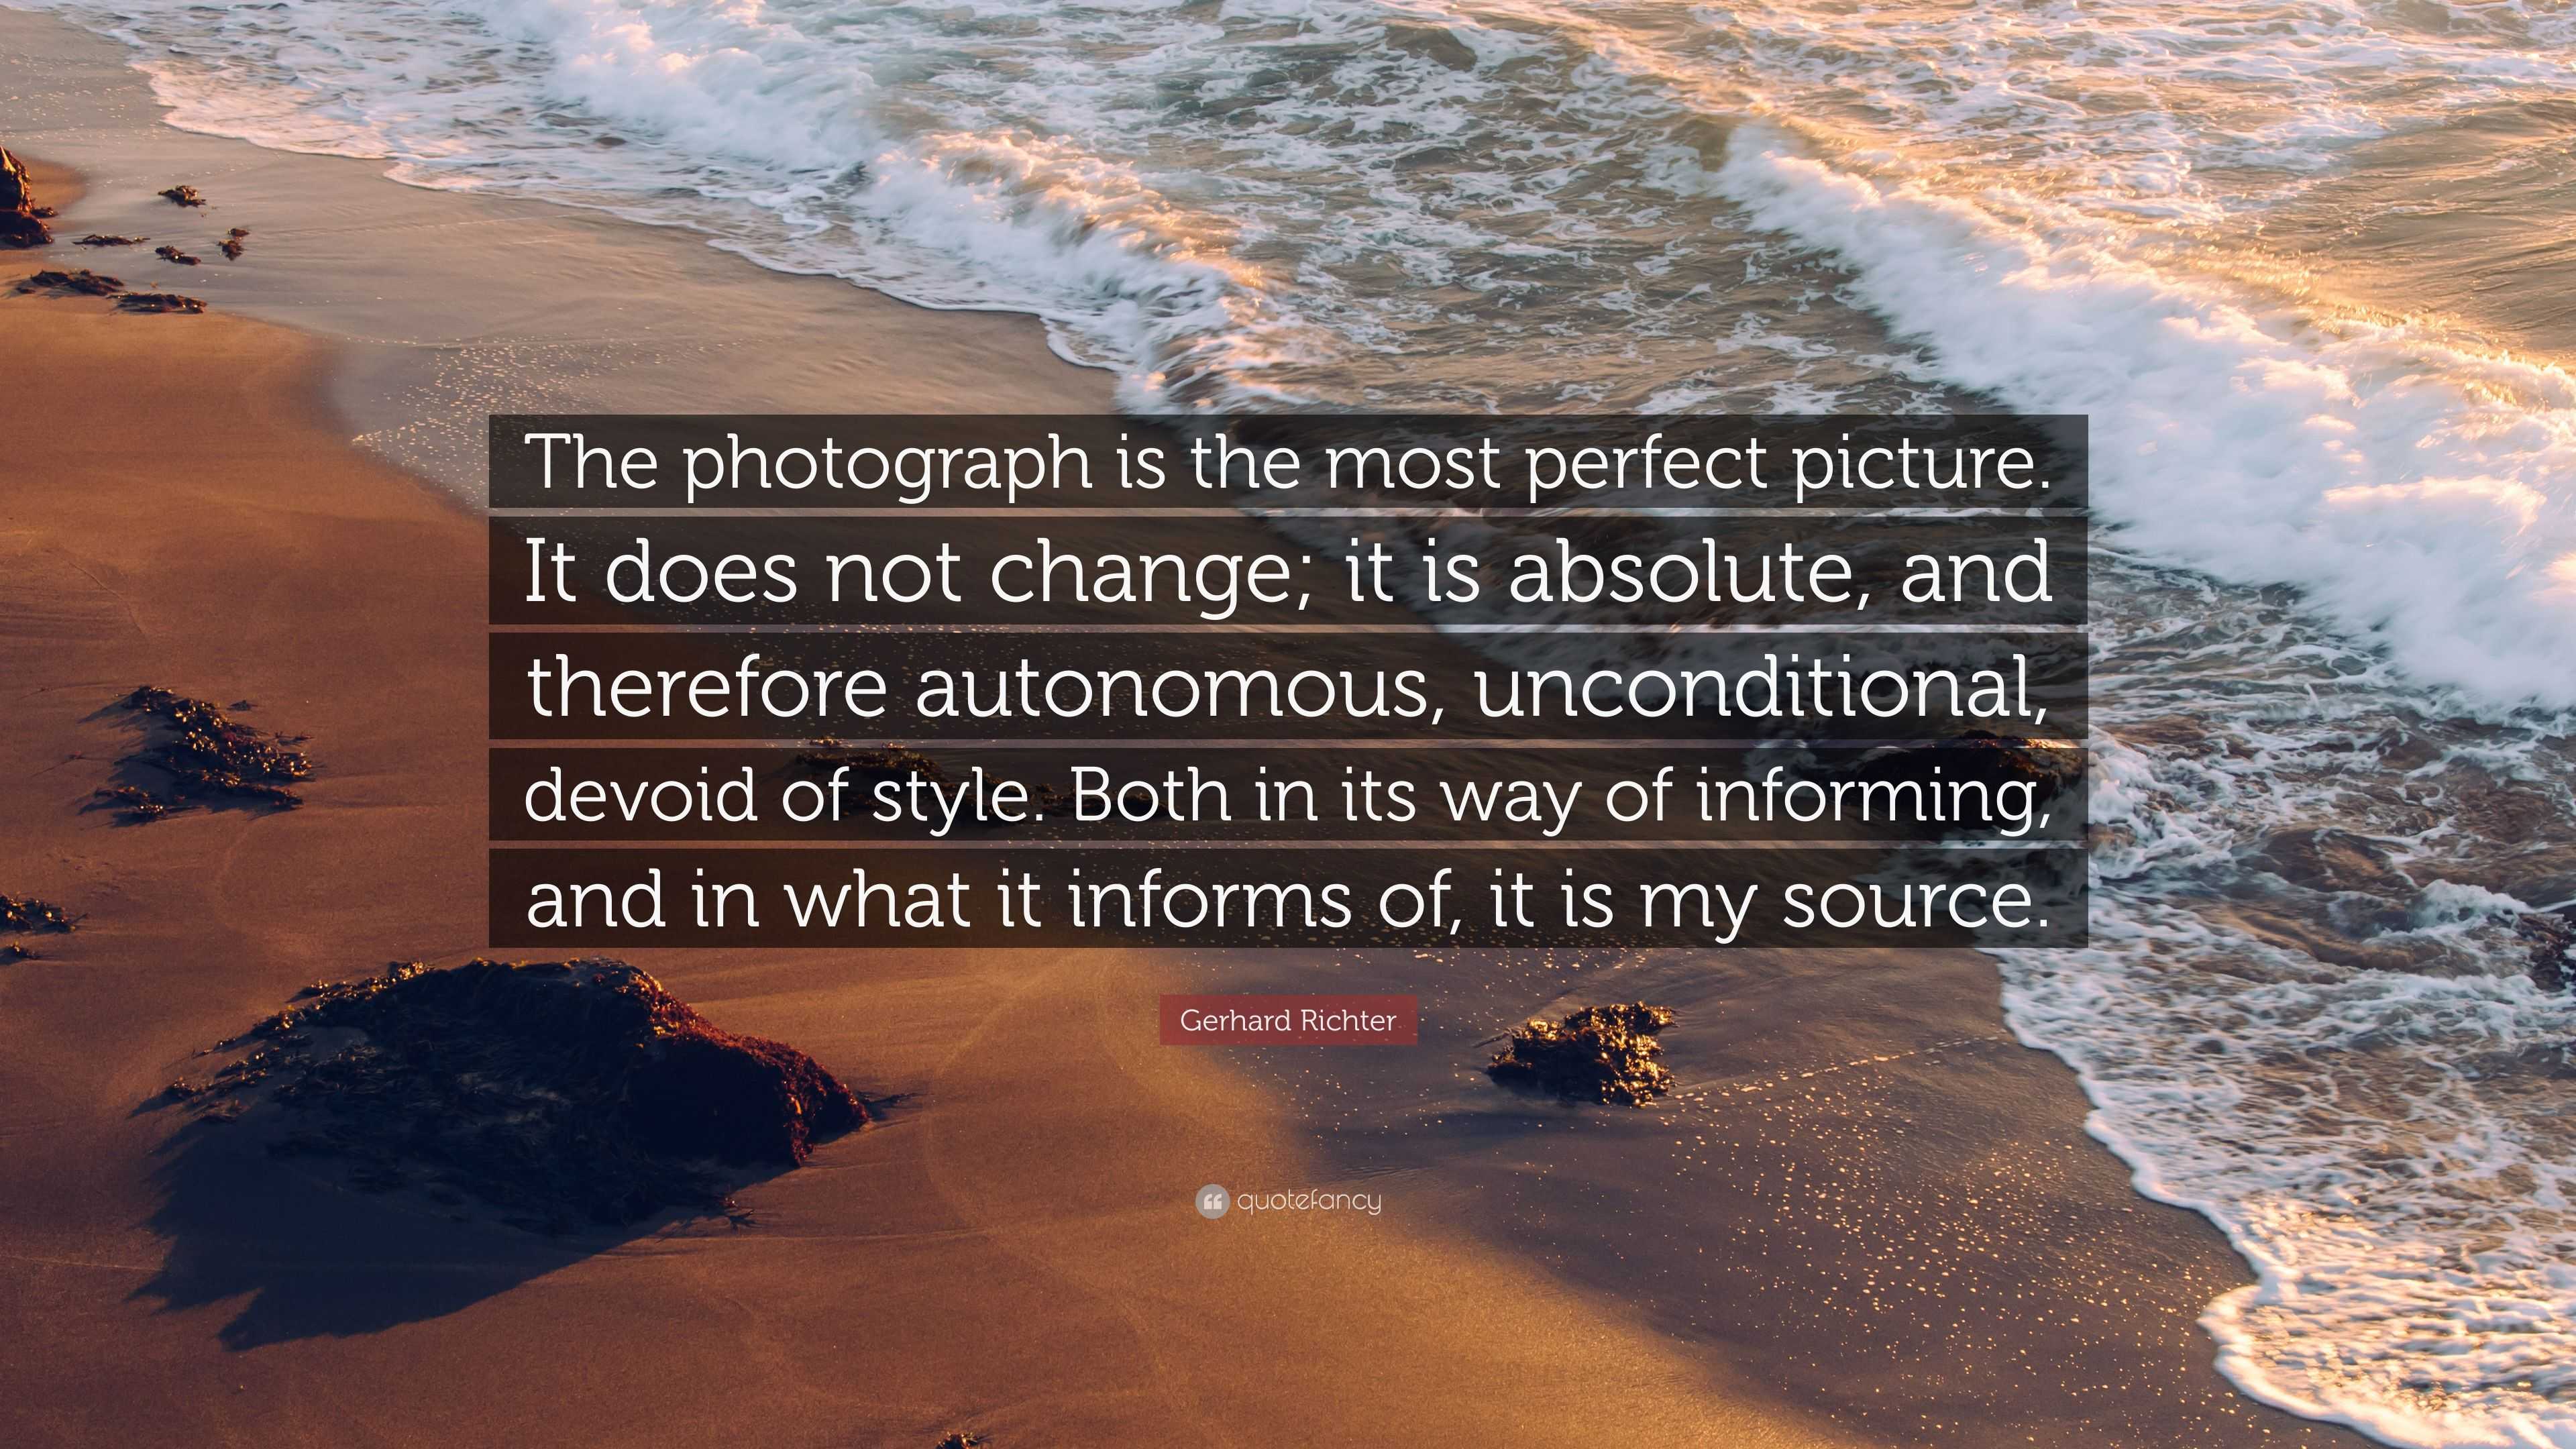 Gerhard Richter Quote: “The photograph is the most perfect picture. It ...